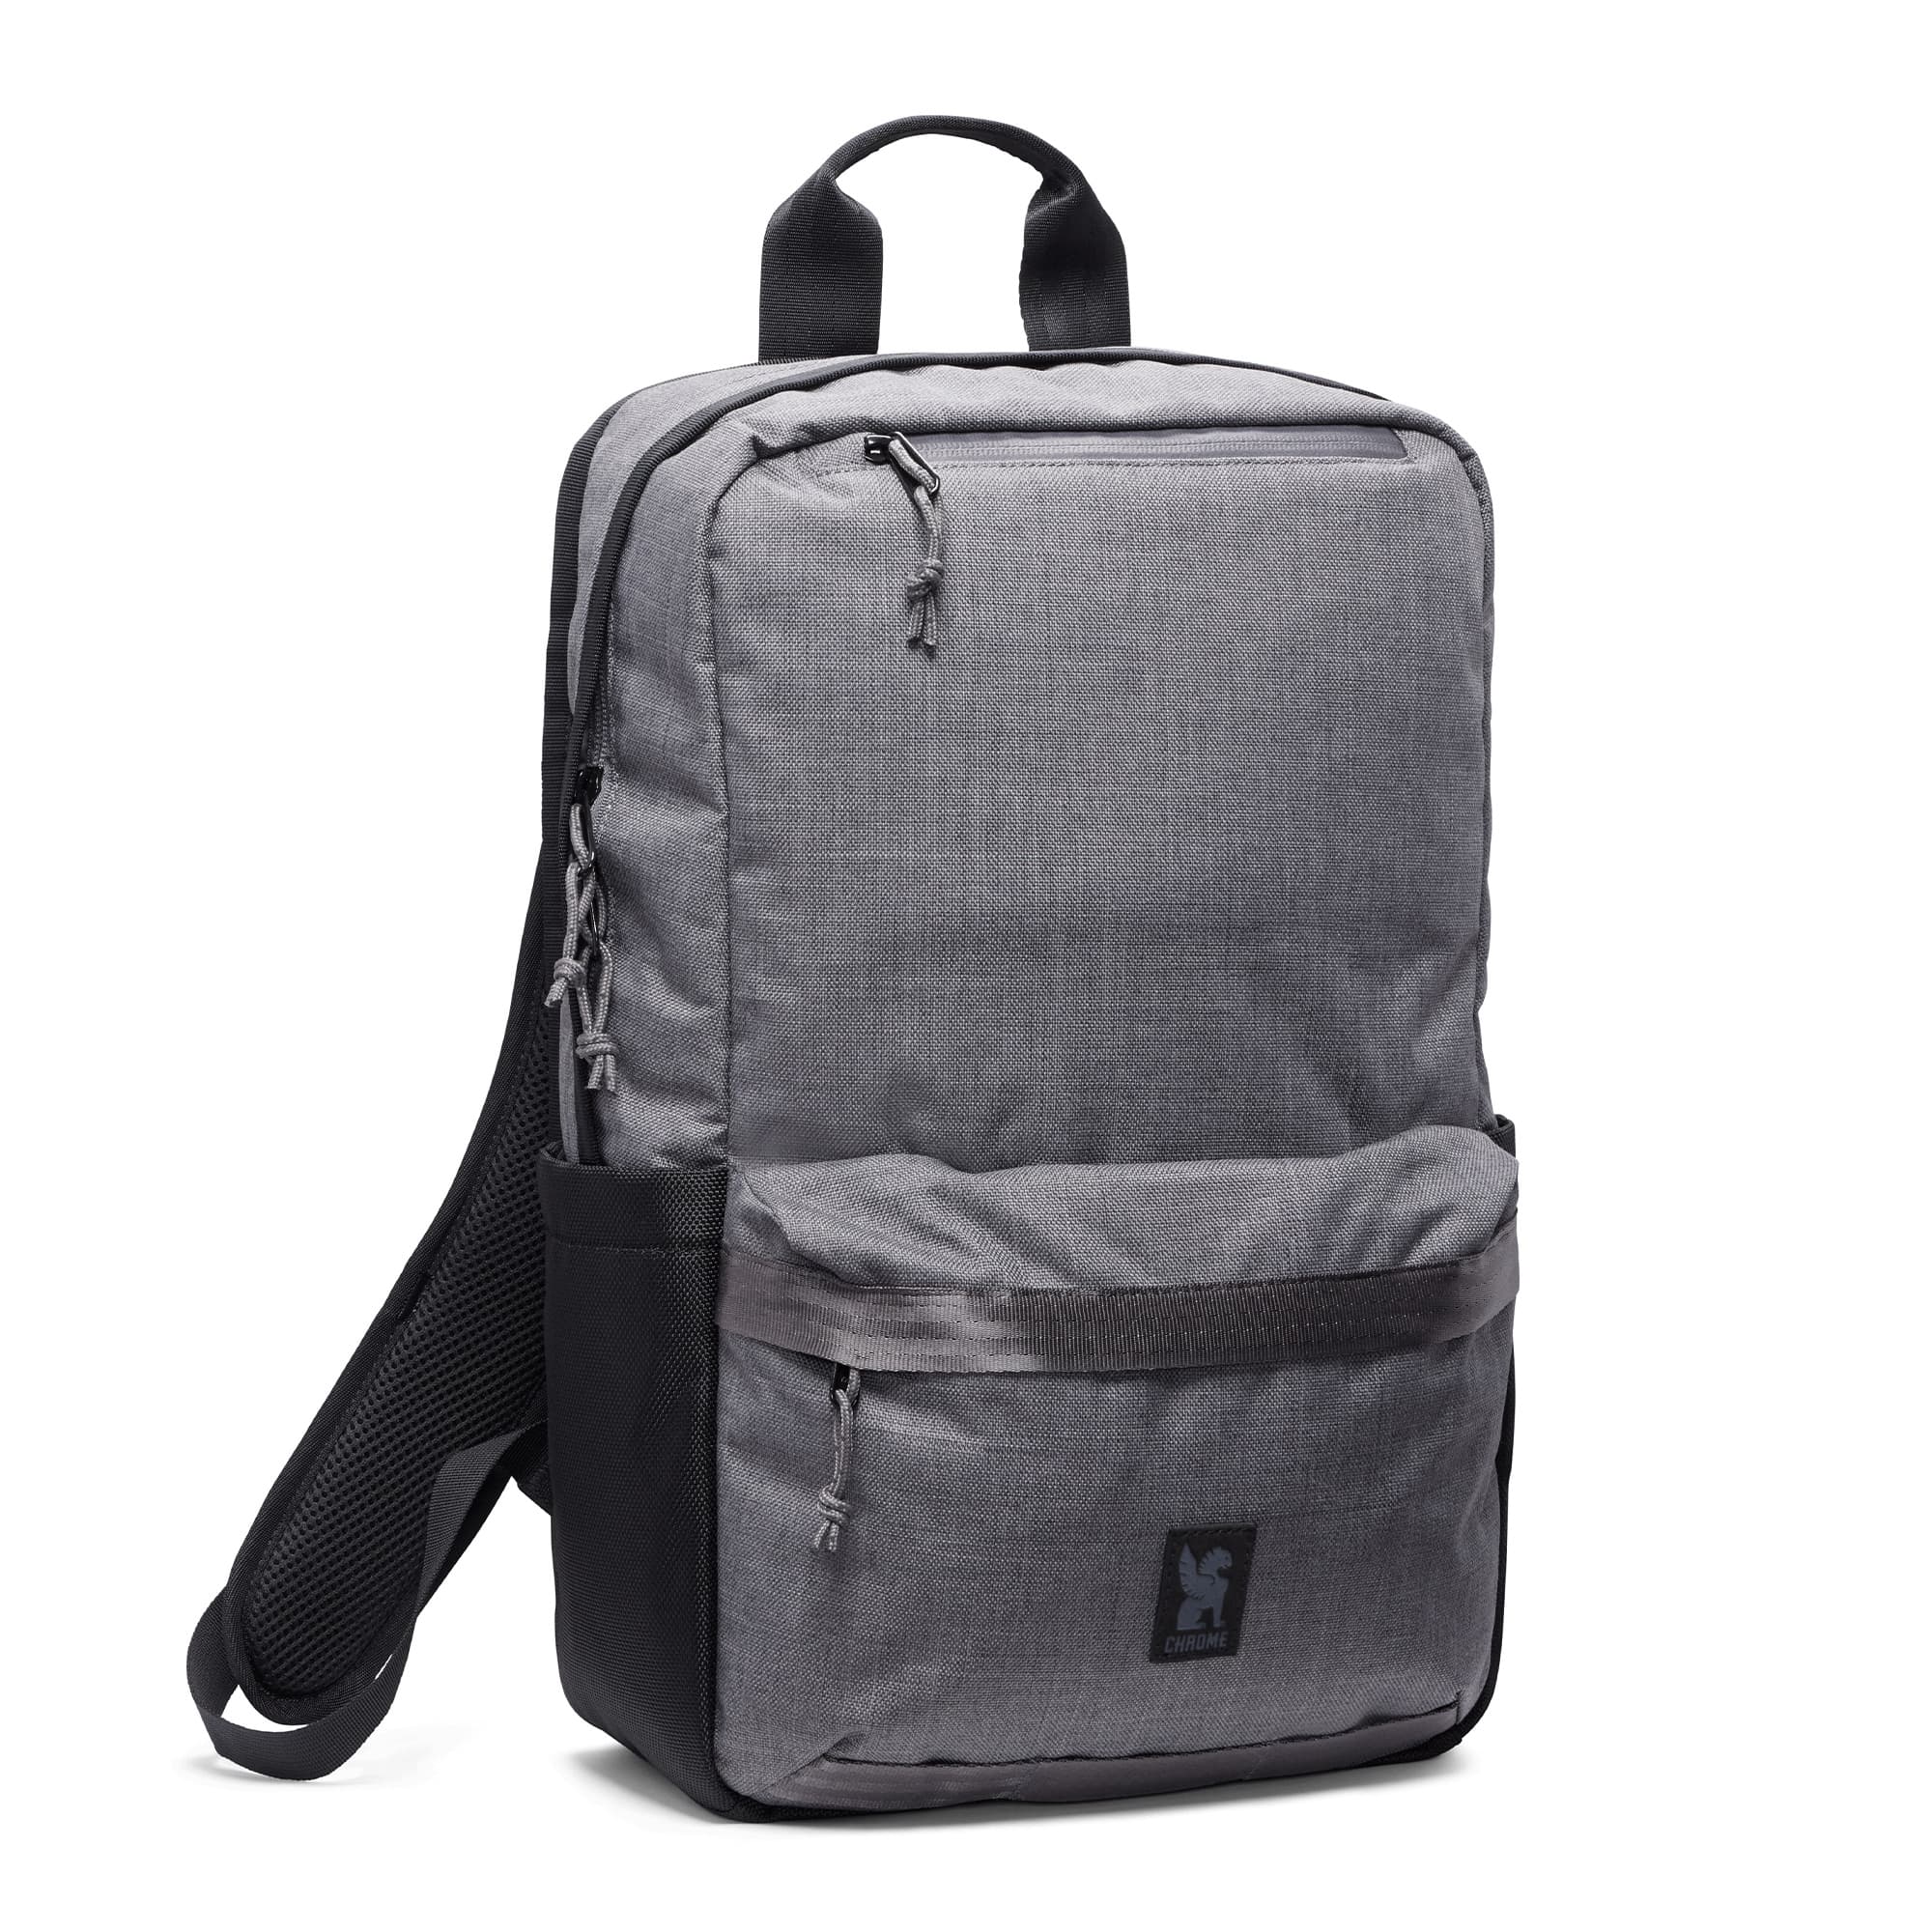 The new Hondo 18L backpack in grey #color_castlerock twill